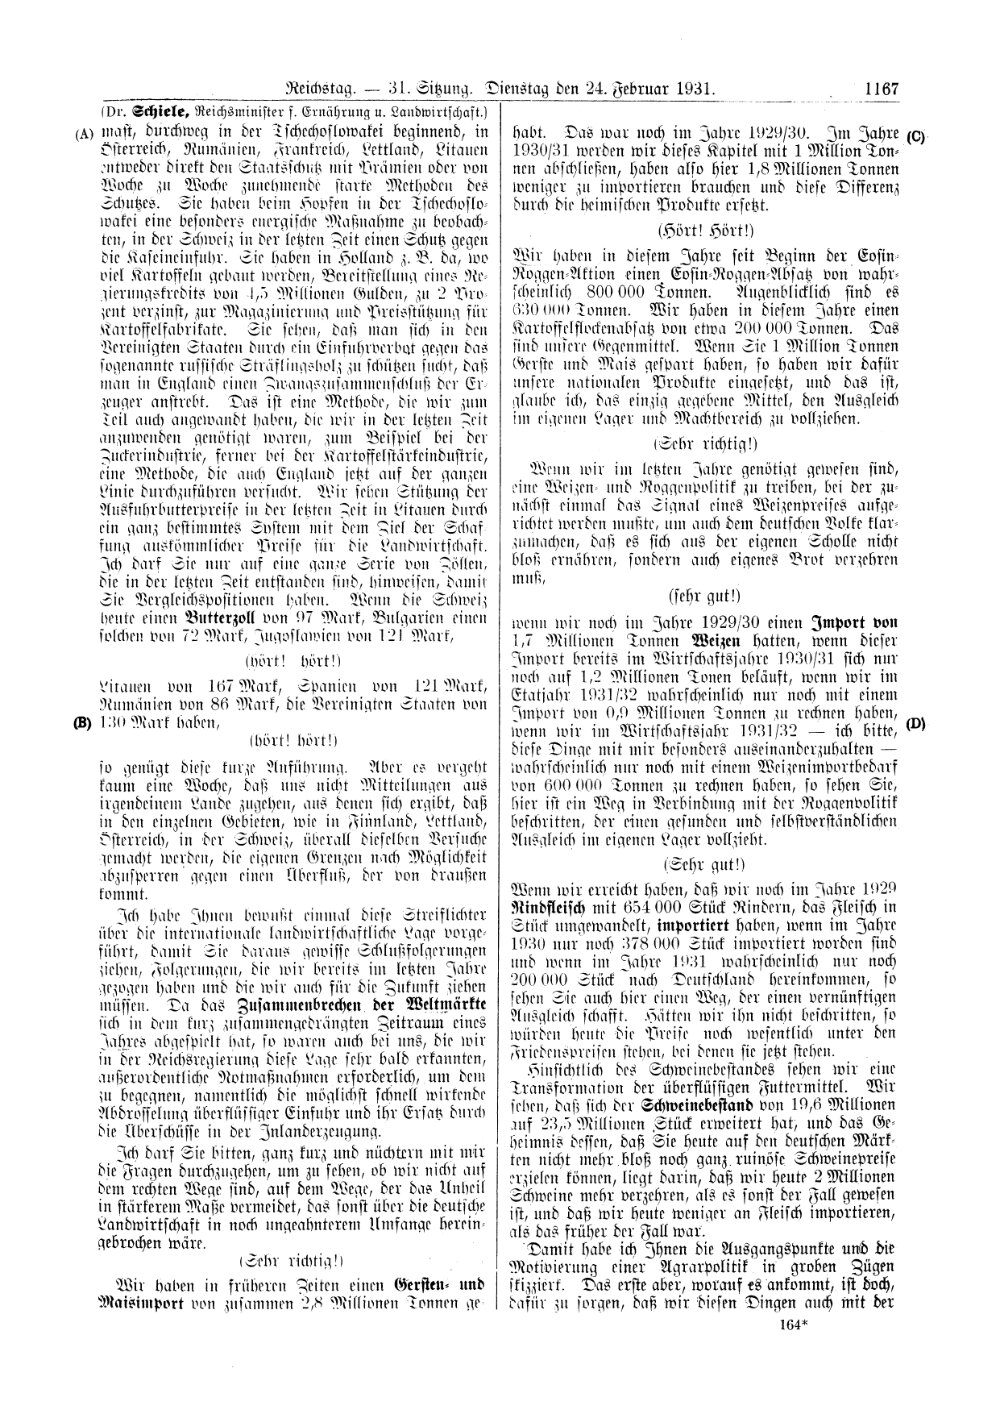 Scan of page 1167